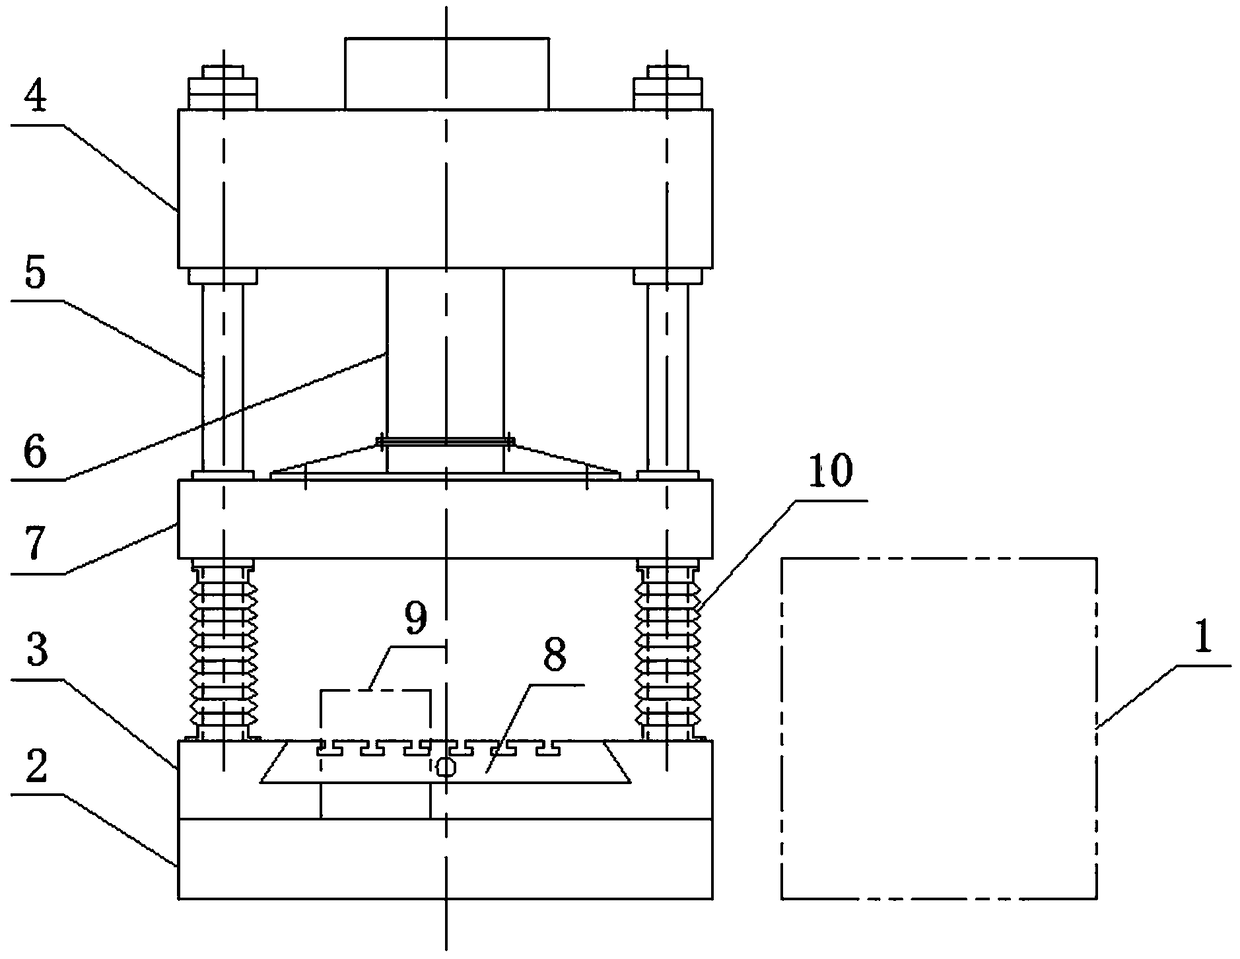 Oil press with functions of buffering, noise reduction and convenient mold mounting and dismounting